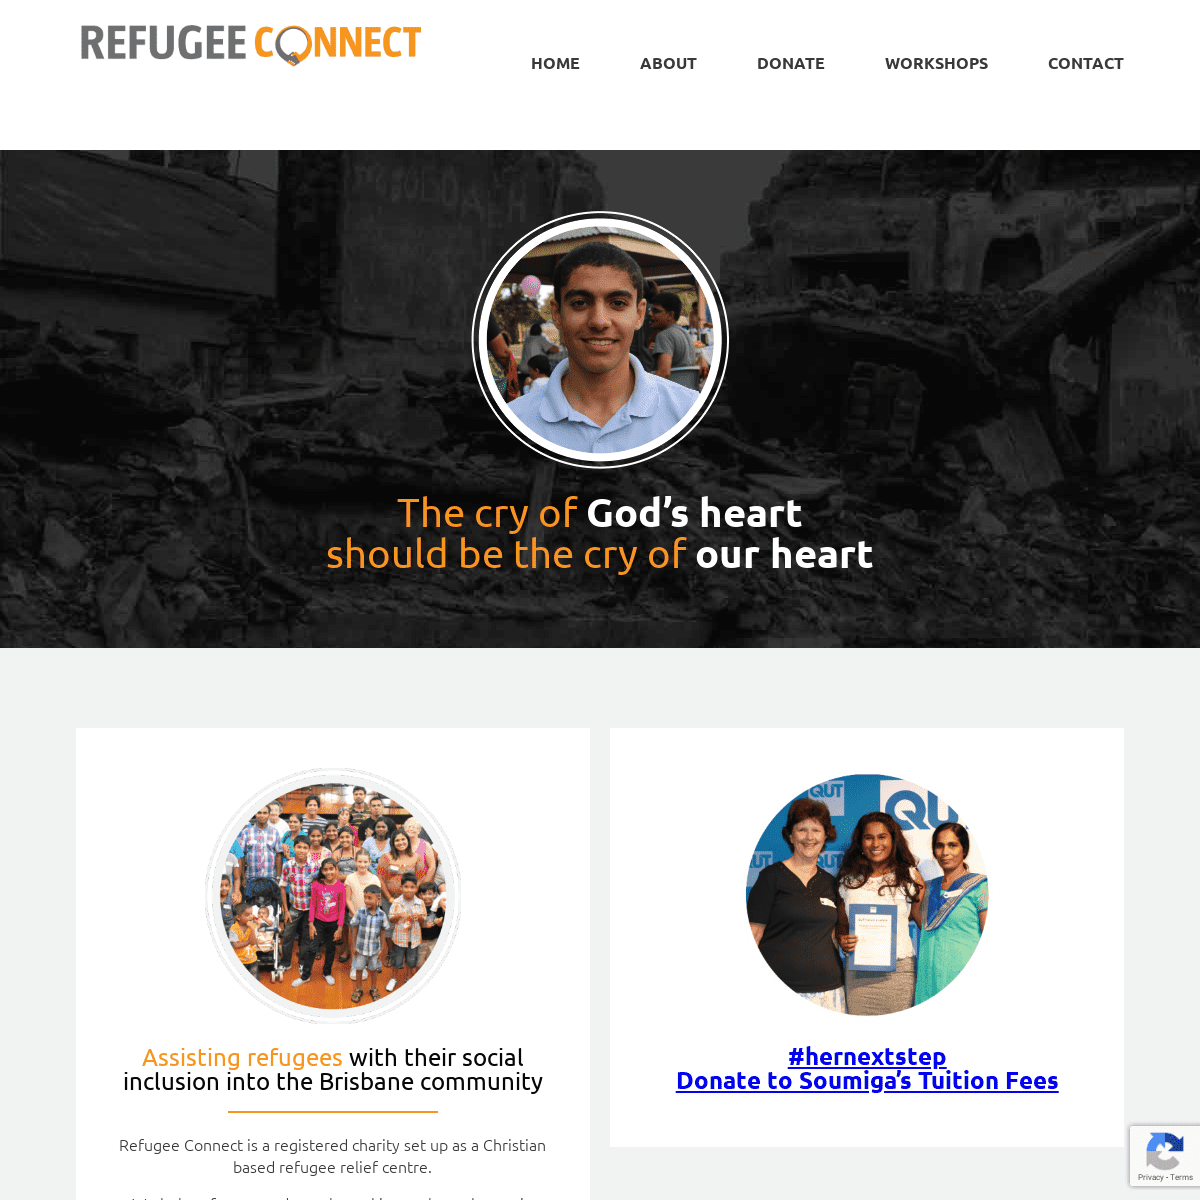 A complete backup of refugeeconnect.org.au